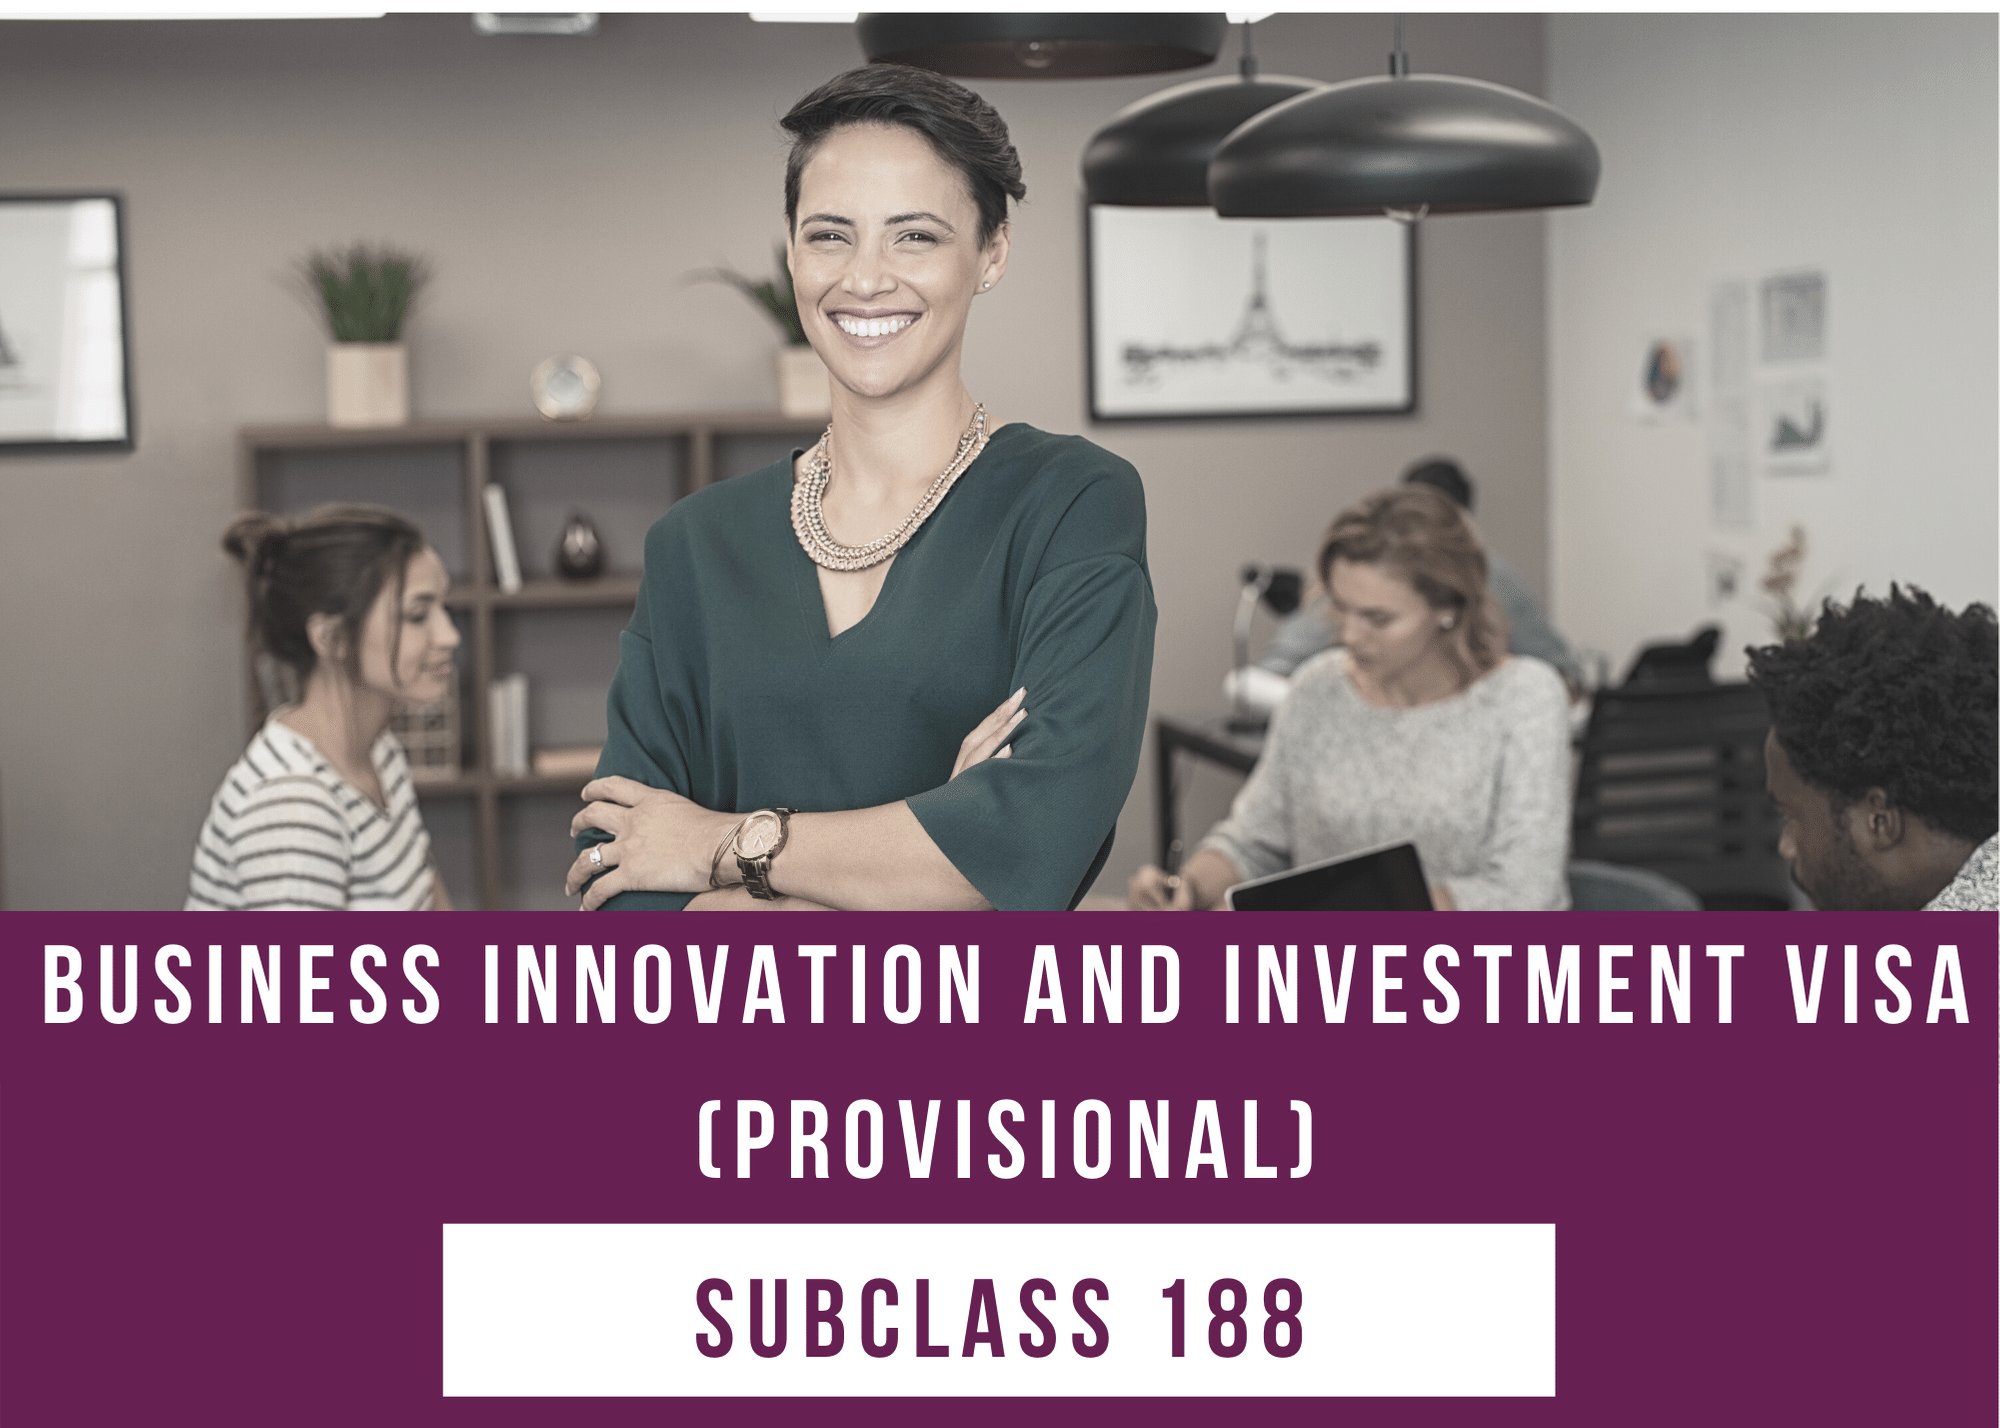 business-innovation-investment-visa-subclass-188